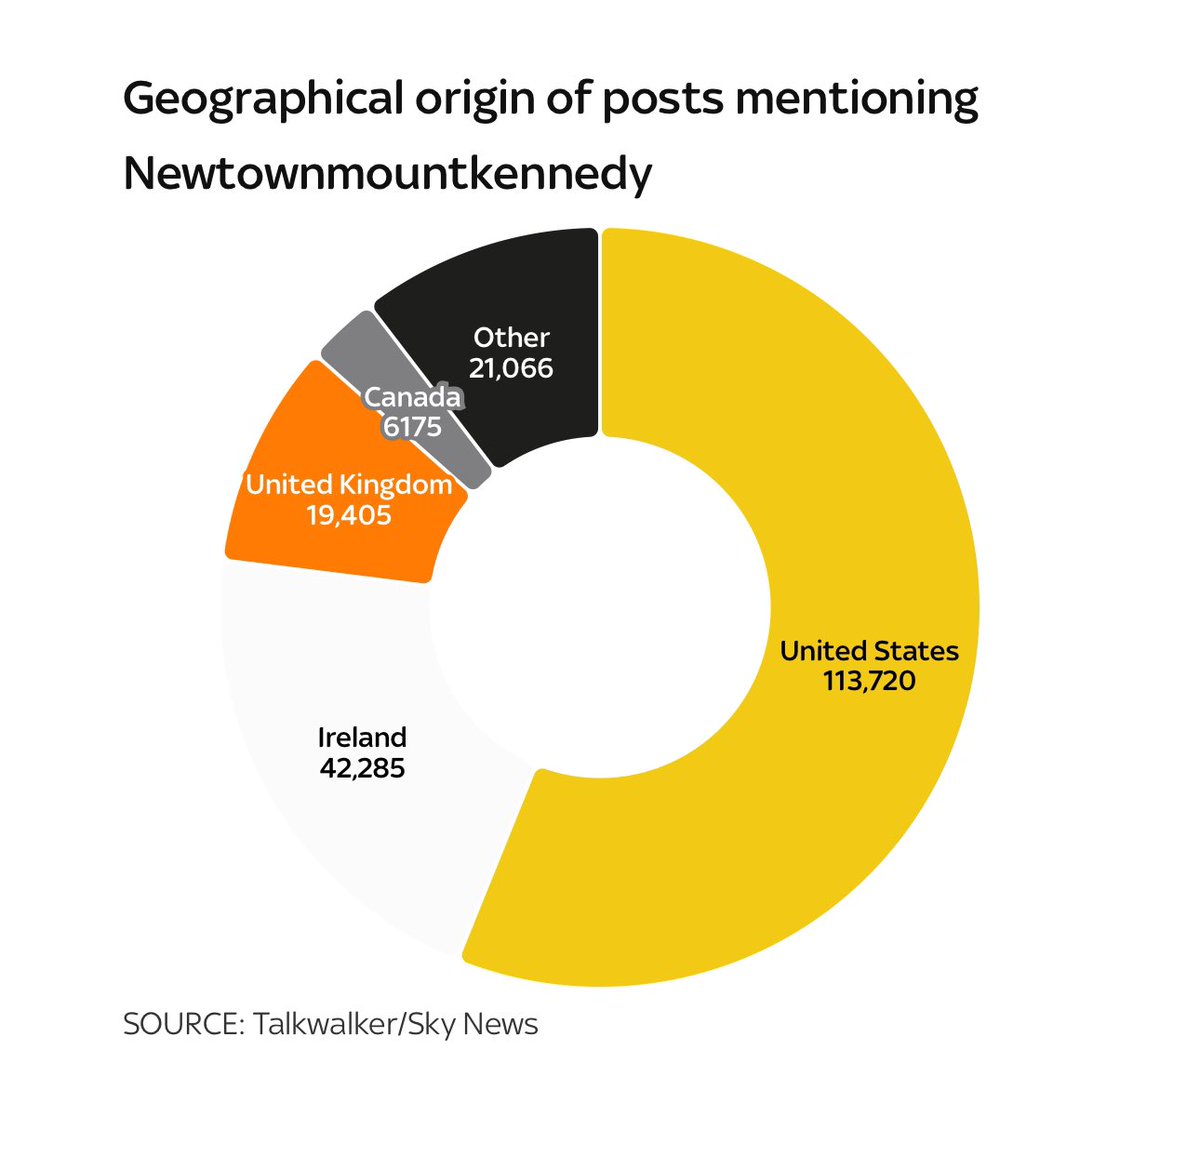 In the latest evidence of this hellsite being a racist sewer, the vast majority of posts about Newtownmountkennedy are coming from…. the United States. Just 20% of posts originated in Ireland. news.sky.com/story/how-inte…